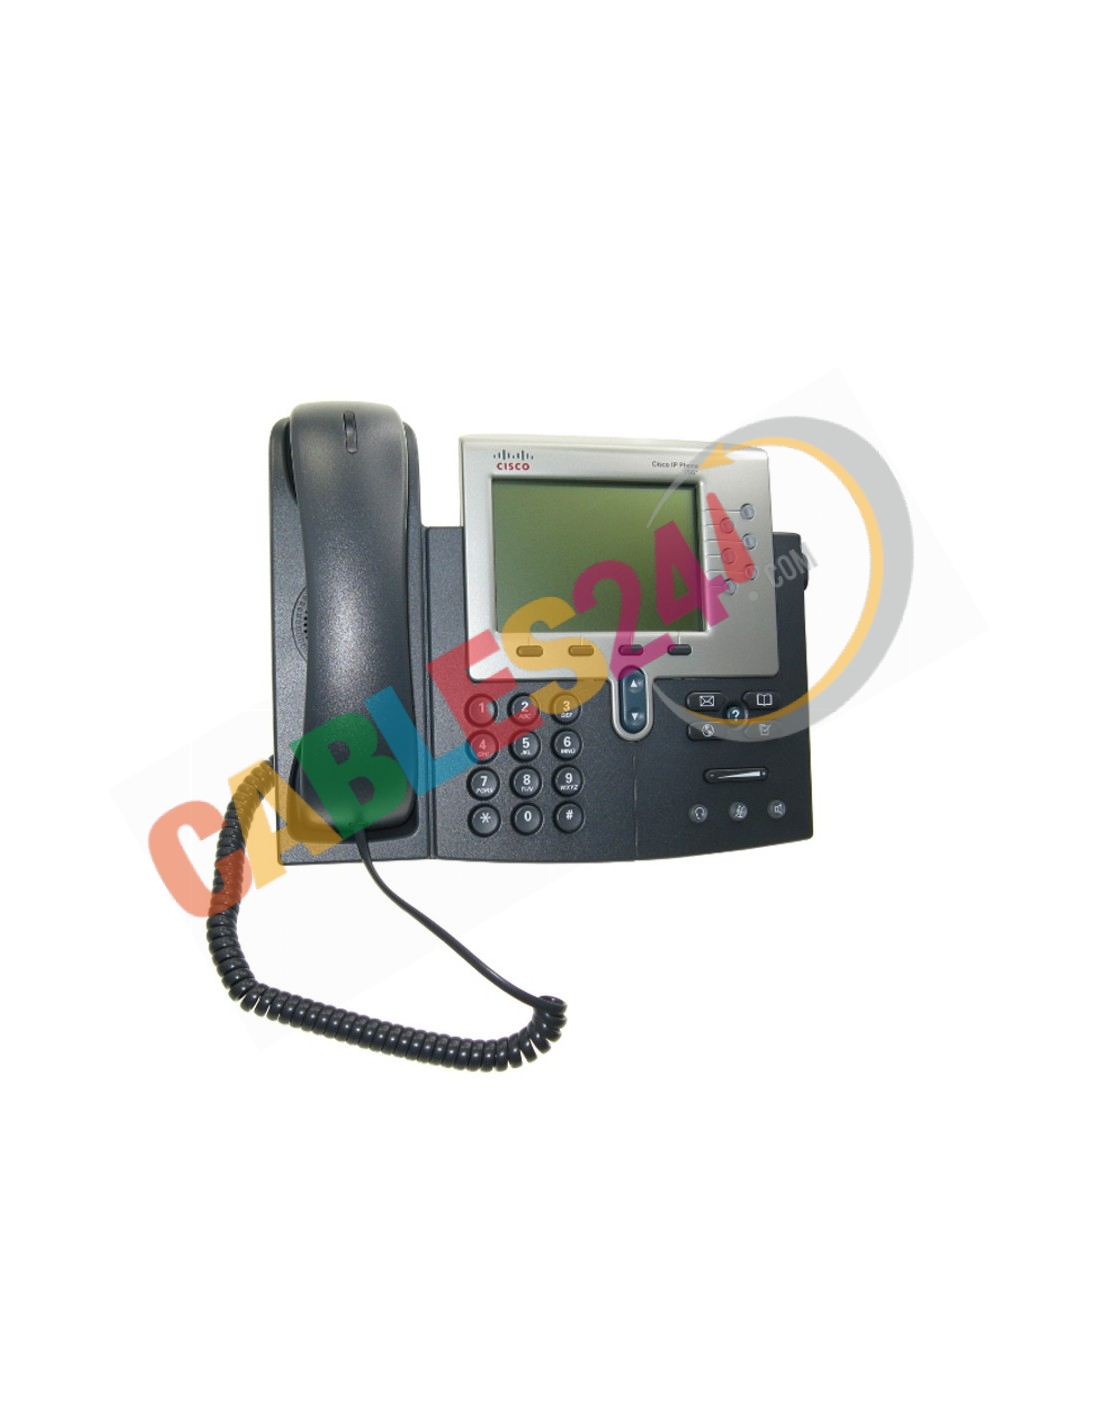 Cisco VoIP Unified IP Phone CP-7961G